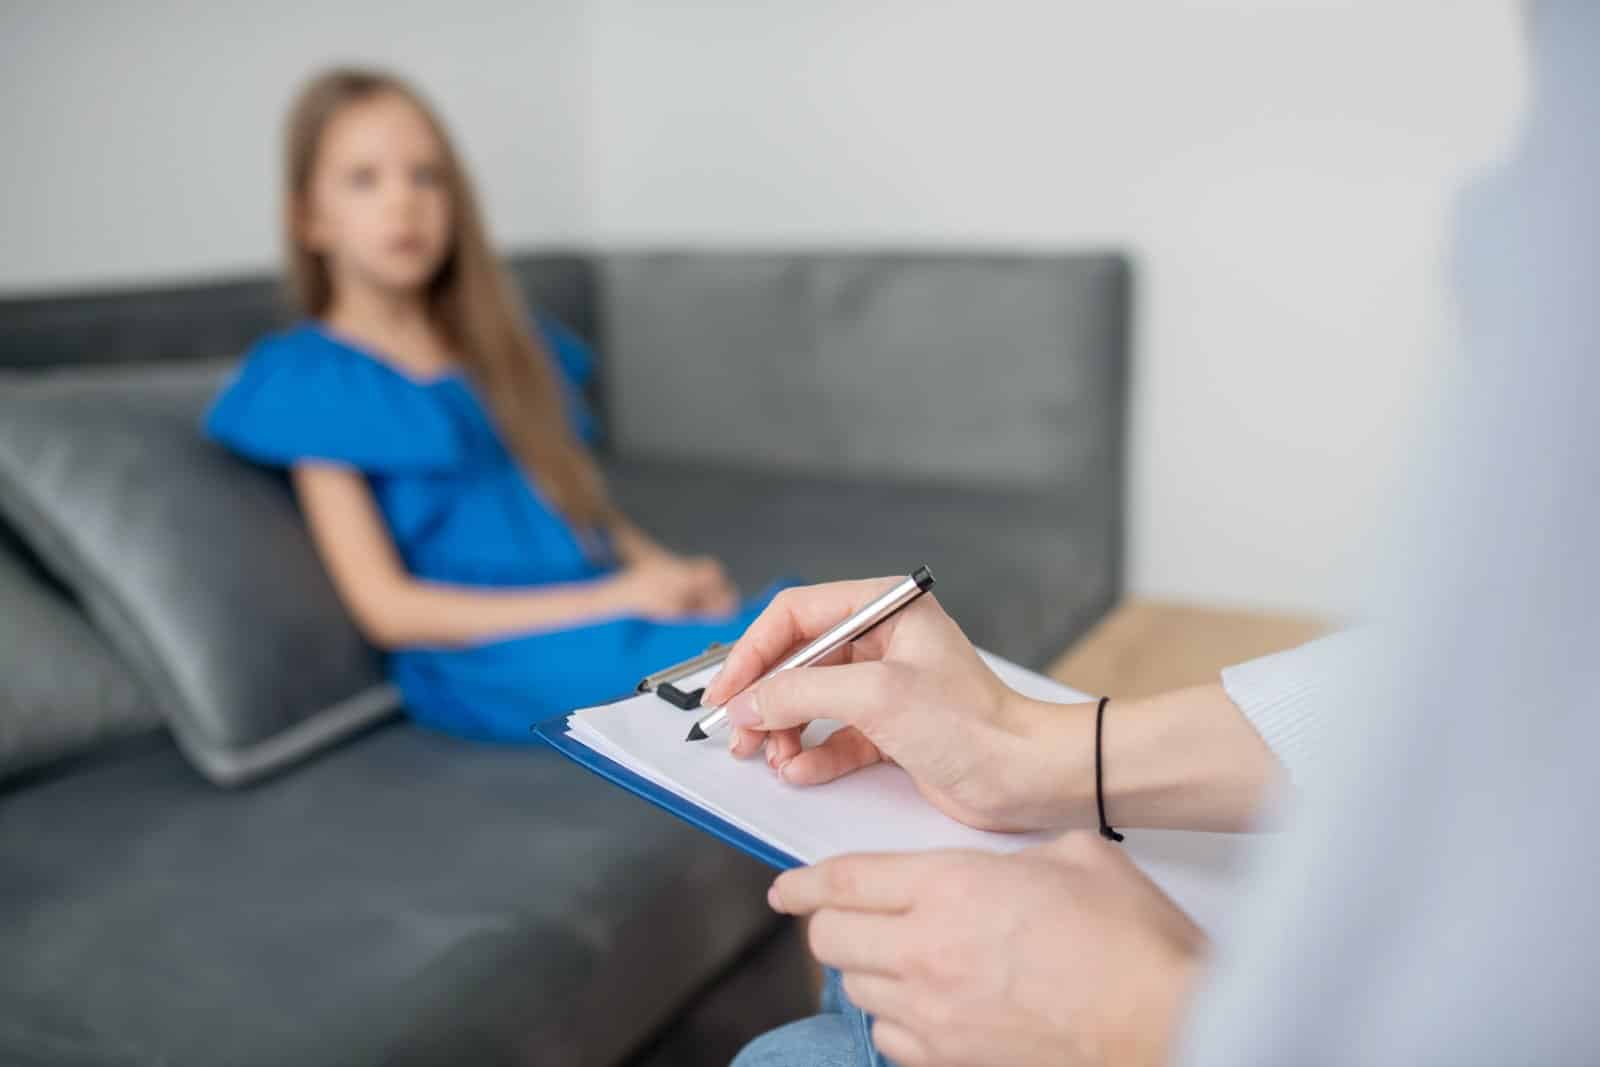 Image Credit: Shutterstock / Dmytro Zinkevych <p><span>However, many conservatives have quickly taken the study’s findings and began using them to discredit gender-affirming care for children.</span></p>